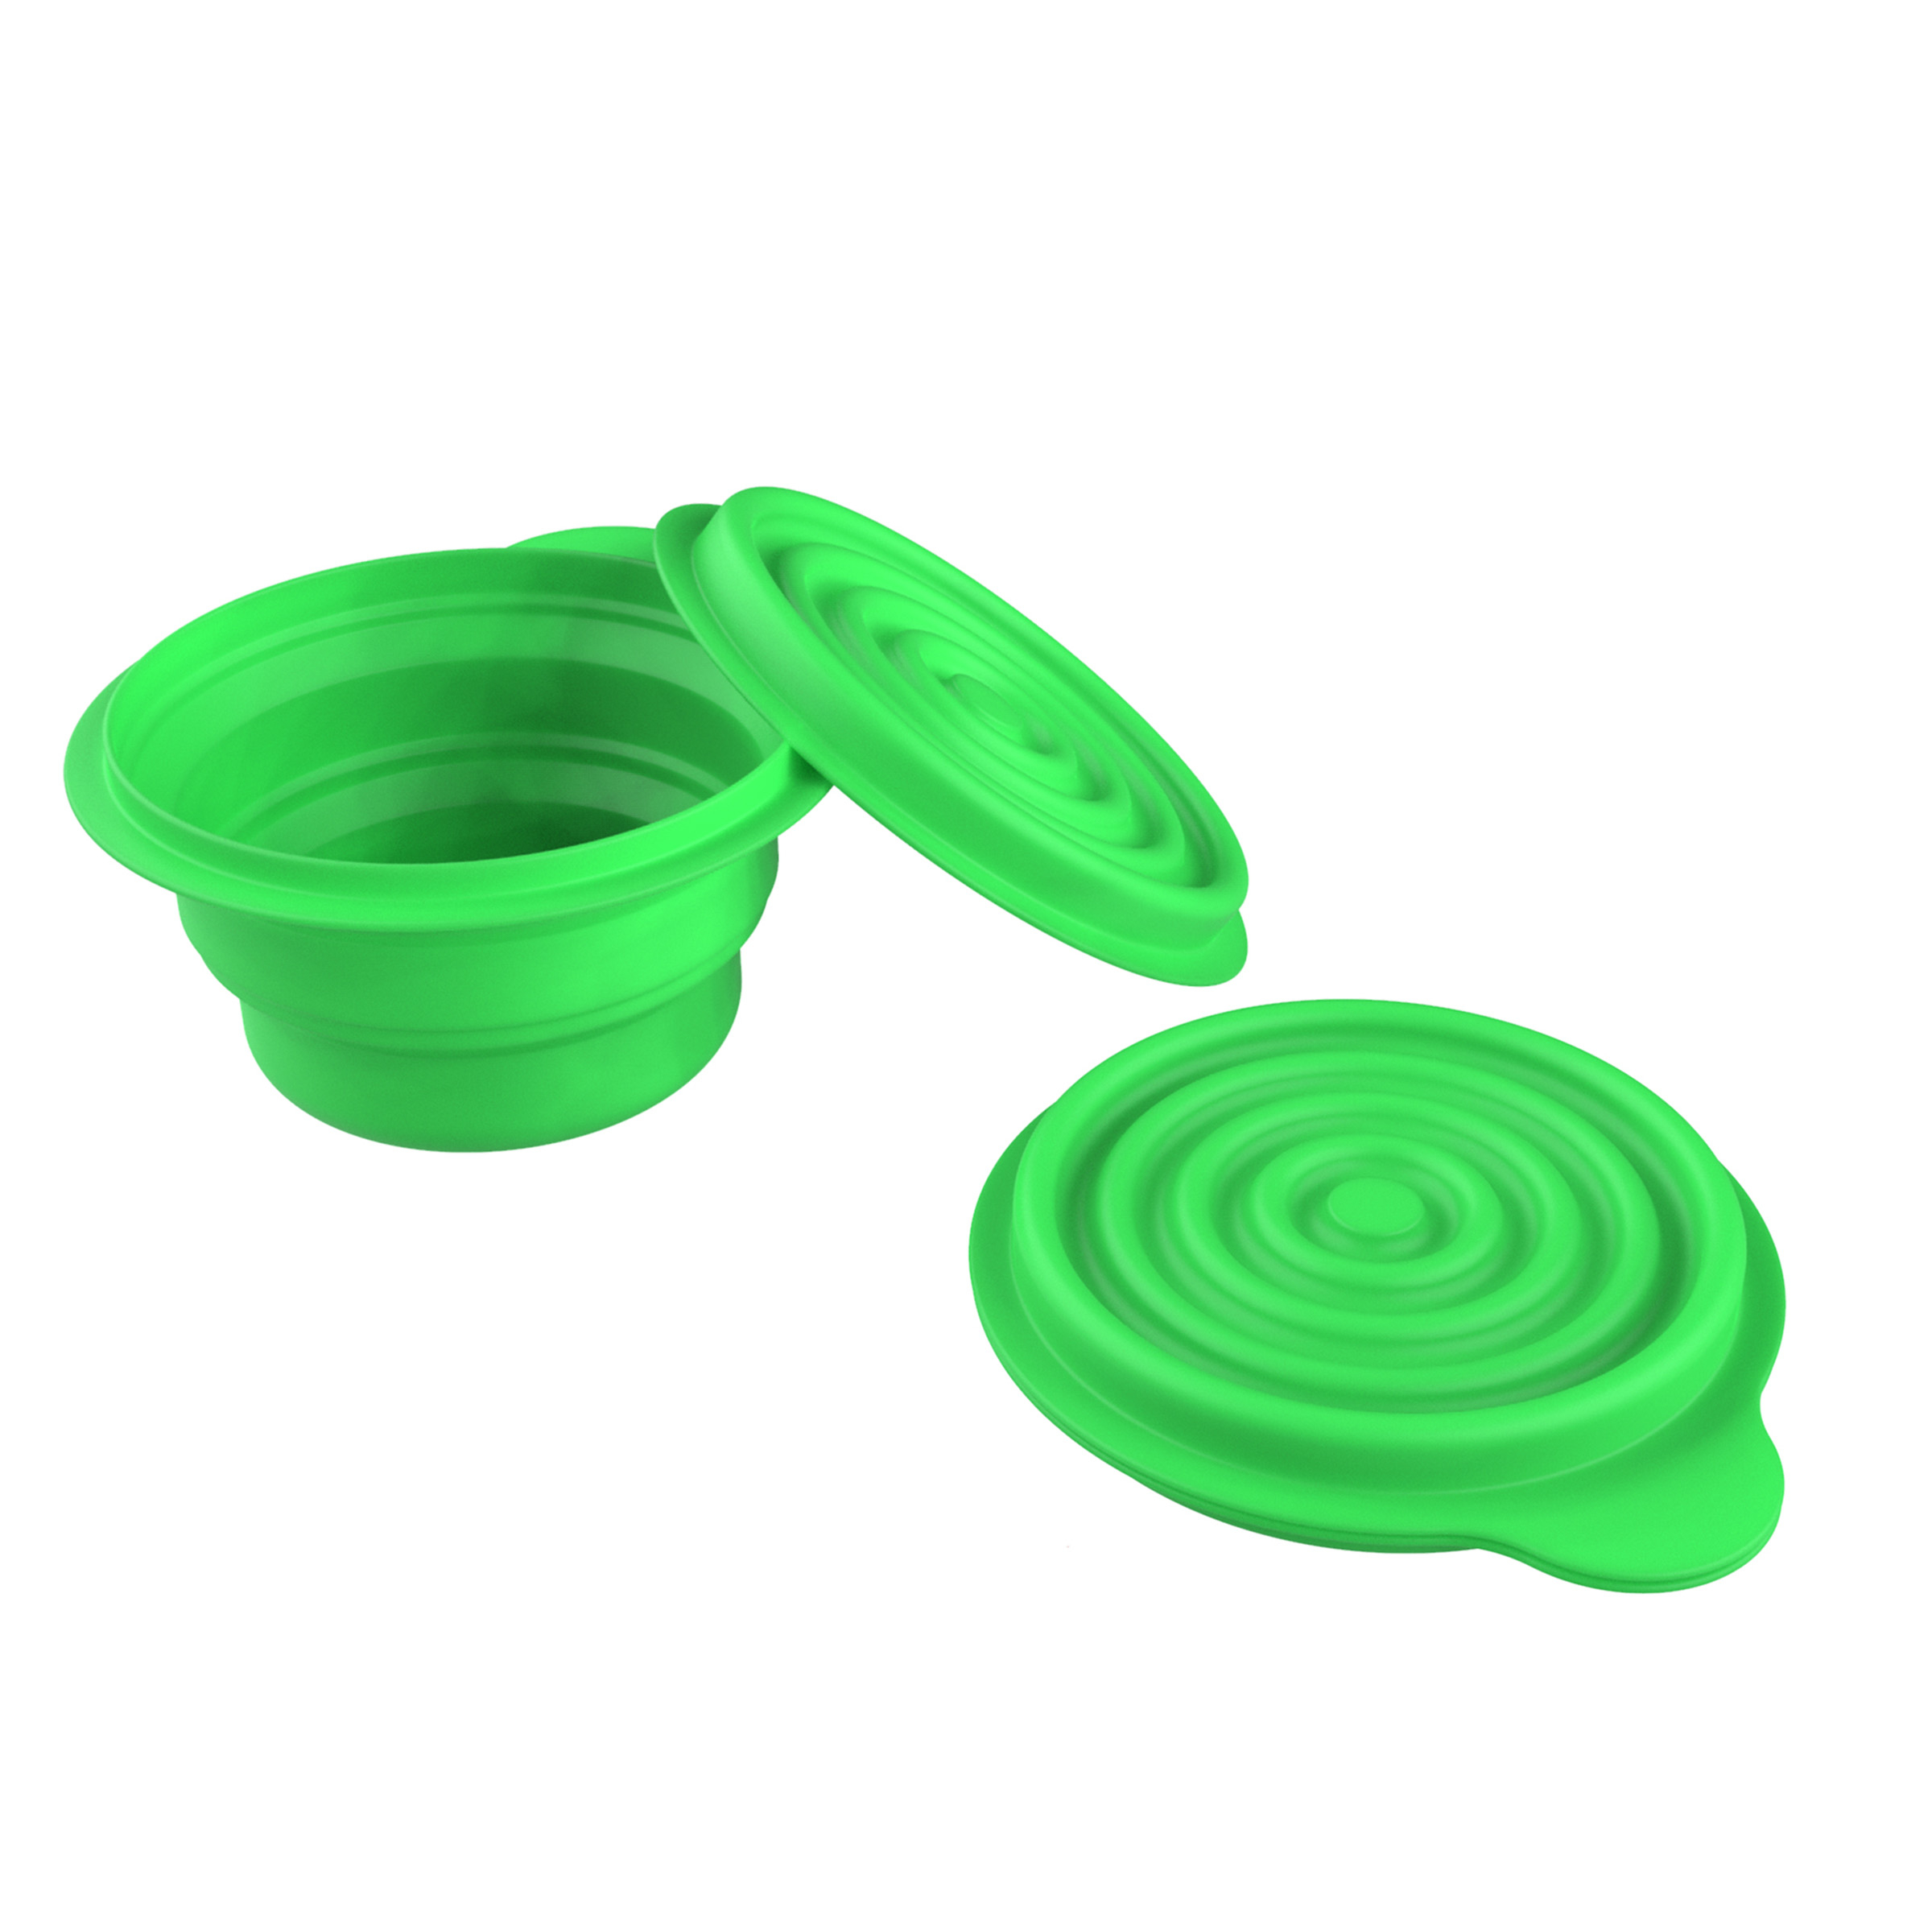 Collapsible Bowls Travel Hiking Camping BPA Free Easy Carry With Lids Set Of 2 Containers With Lids - Green